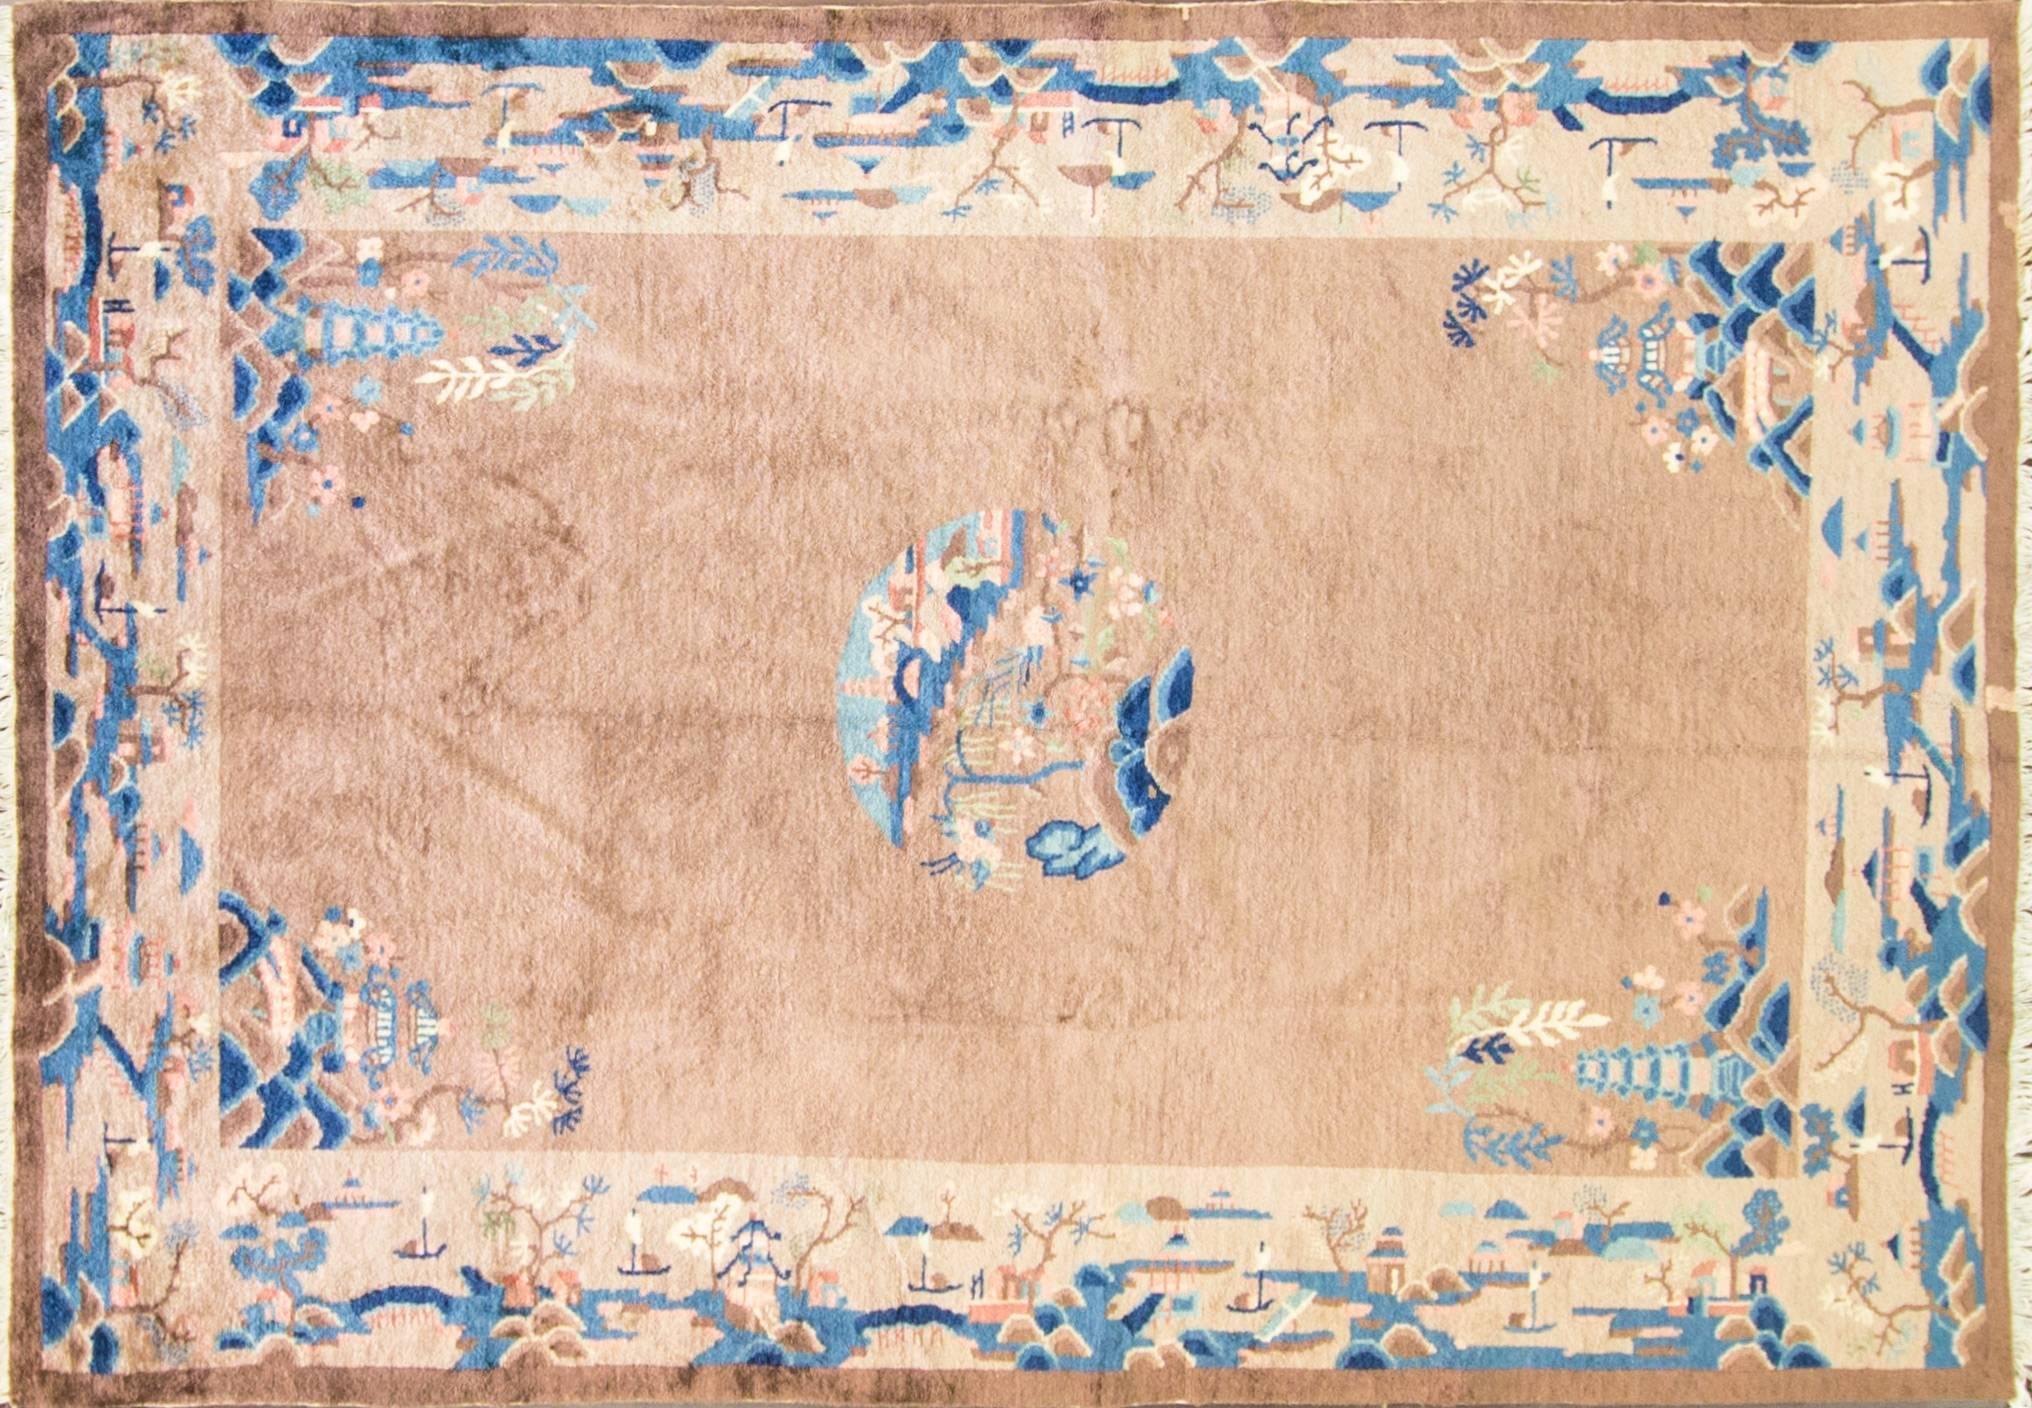 An Art Deco Chinese Peking quality with fine wool and superb quality.
Antique Peking rugs started in China shortly after the end of the First World War. During this period, Chinese rug weaving factories relocated from Ningxia, as well as other